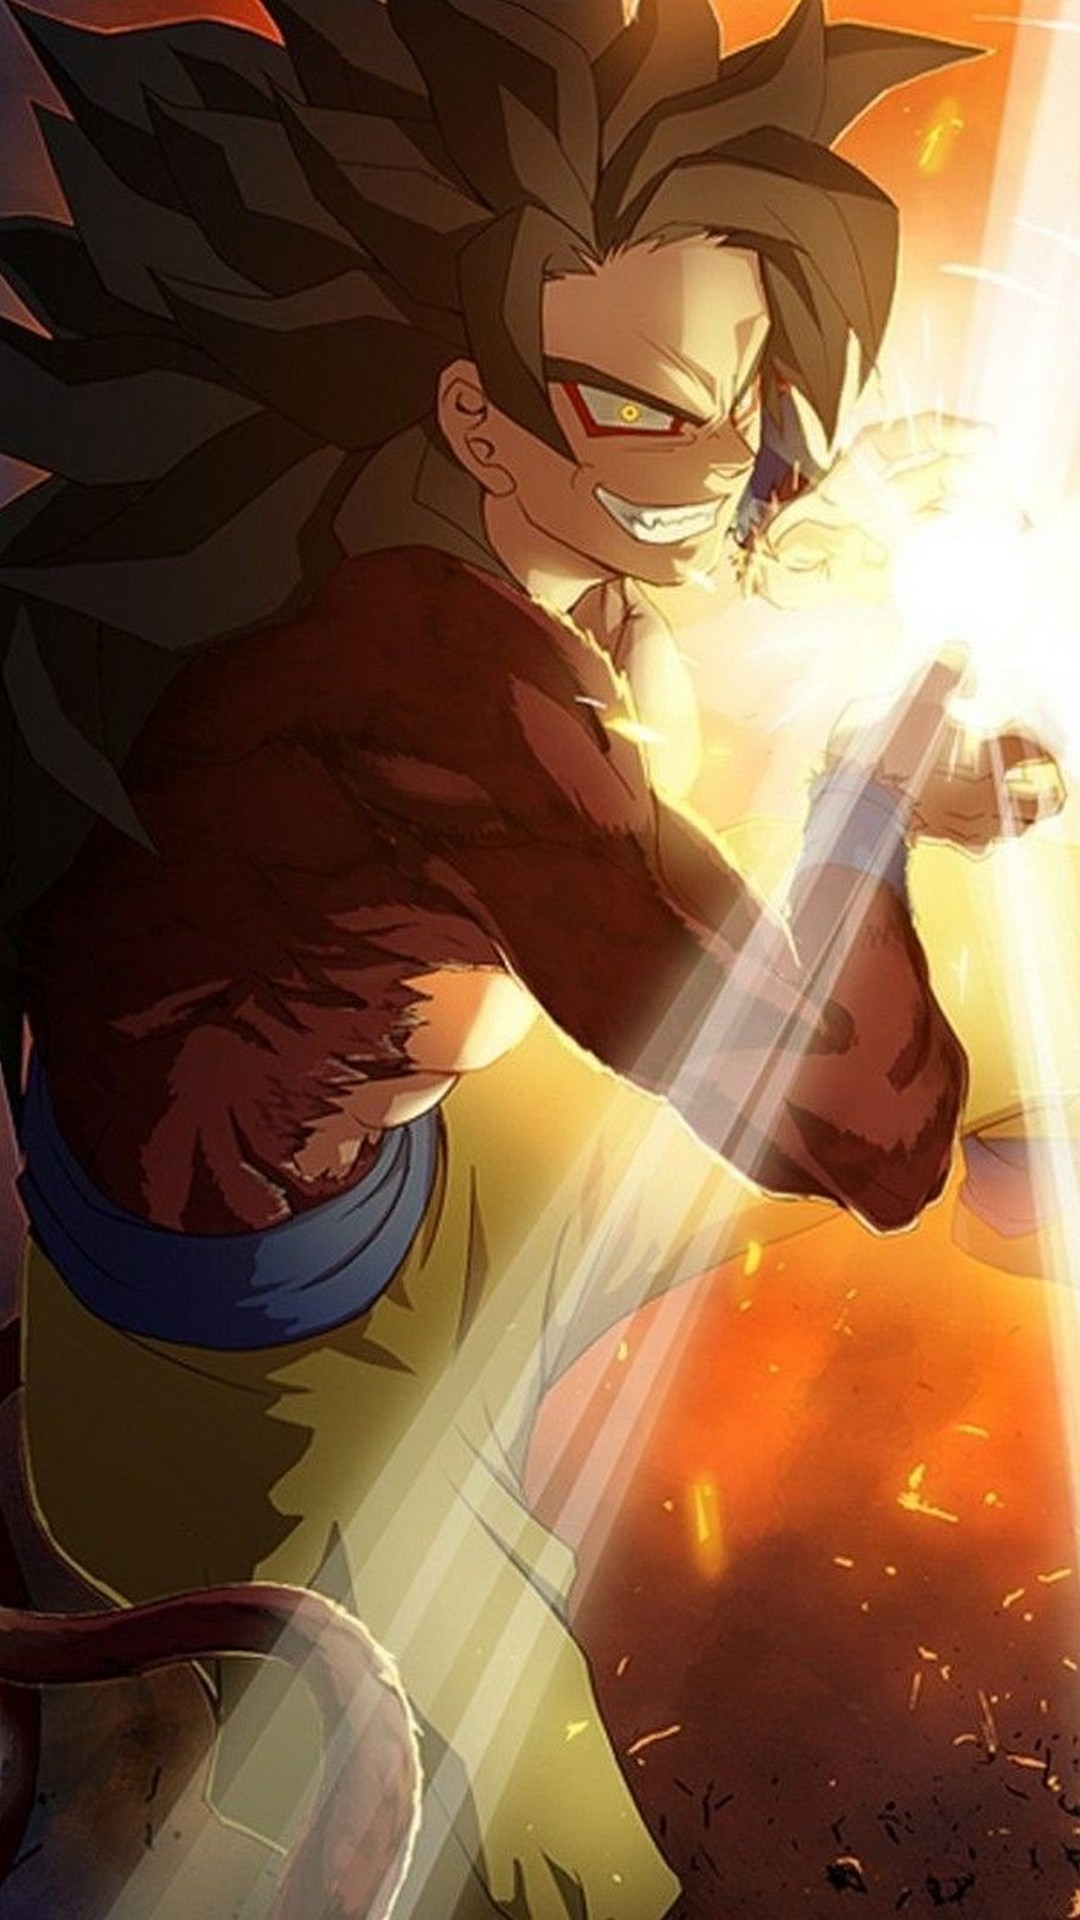 Goku Ssj4 Wallpaper Android With Hd Resolution - Ssj4 Goku Wallpaper Hd - HD Wallpaper 